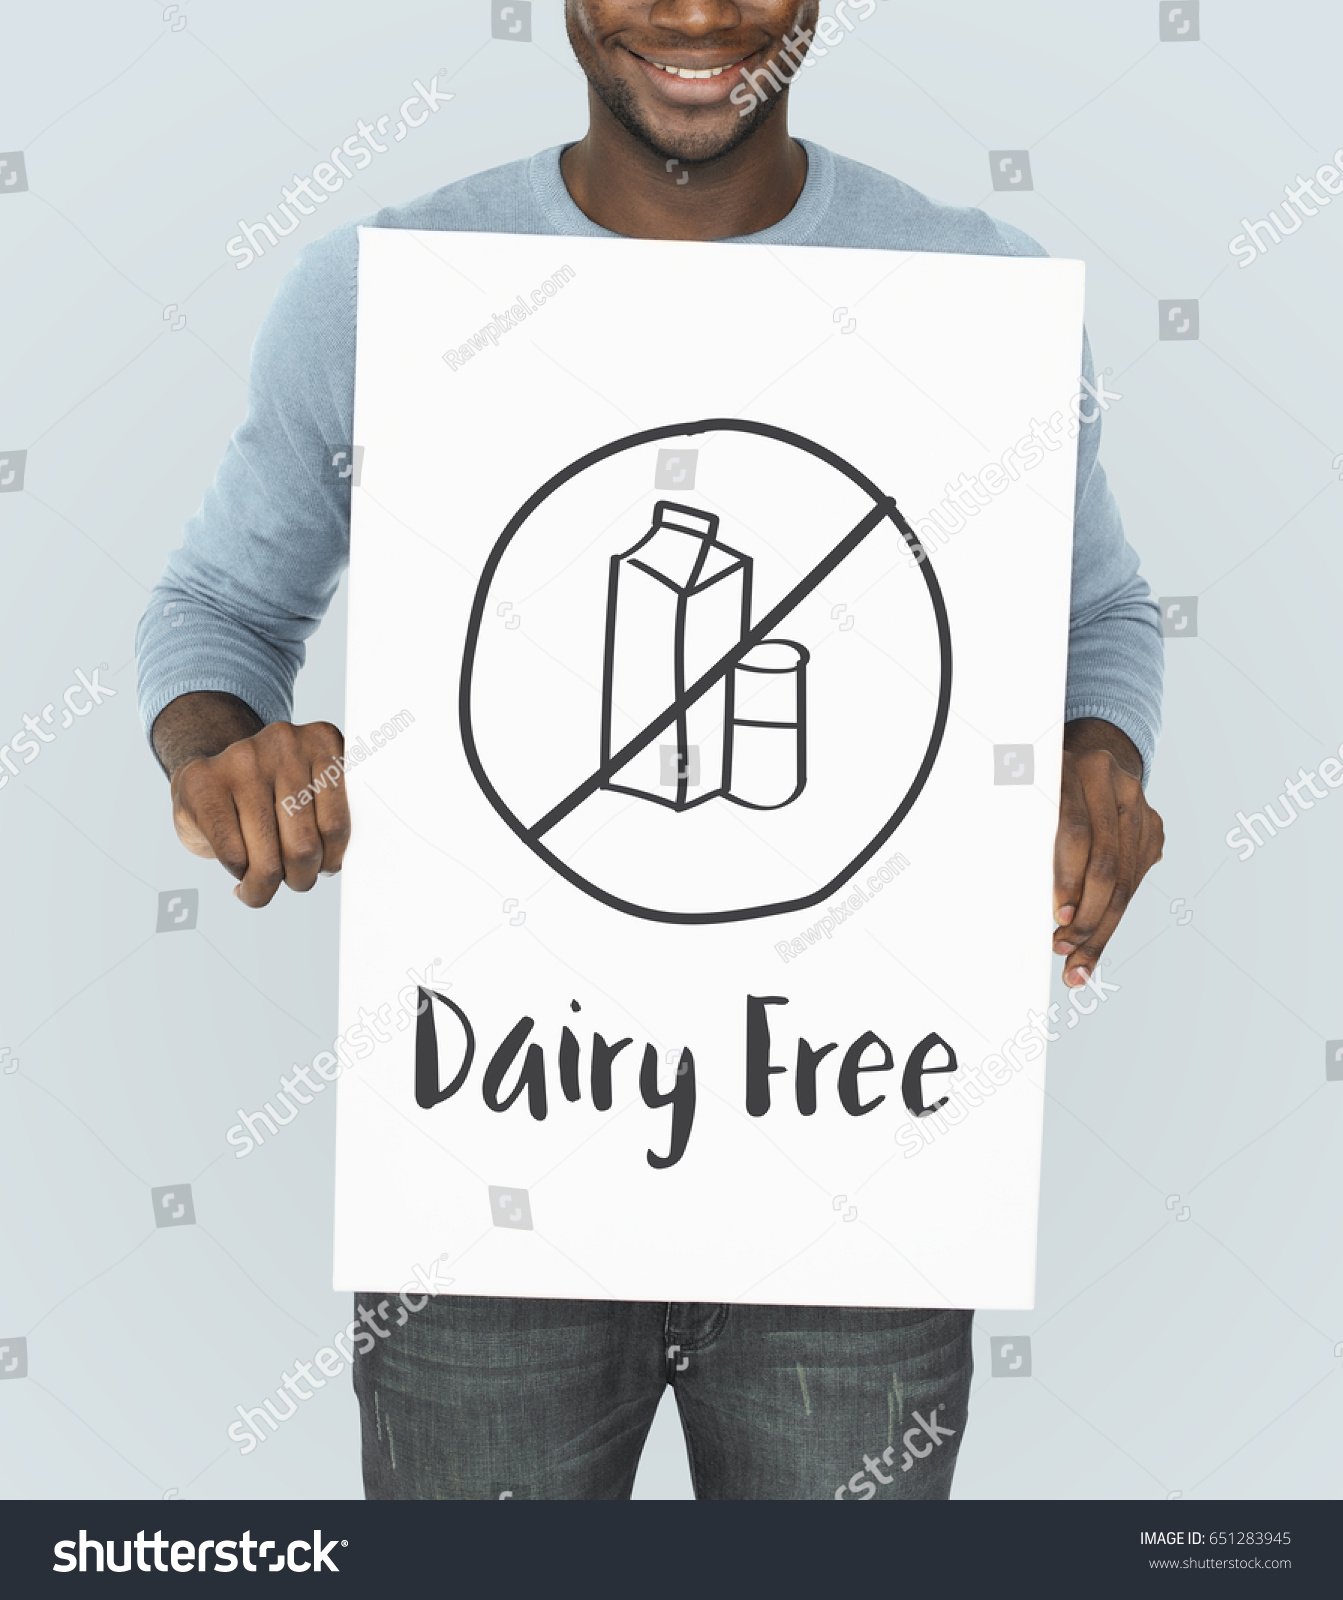 Dairy Free Healthy Lifestyle Concept #651283945